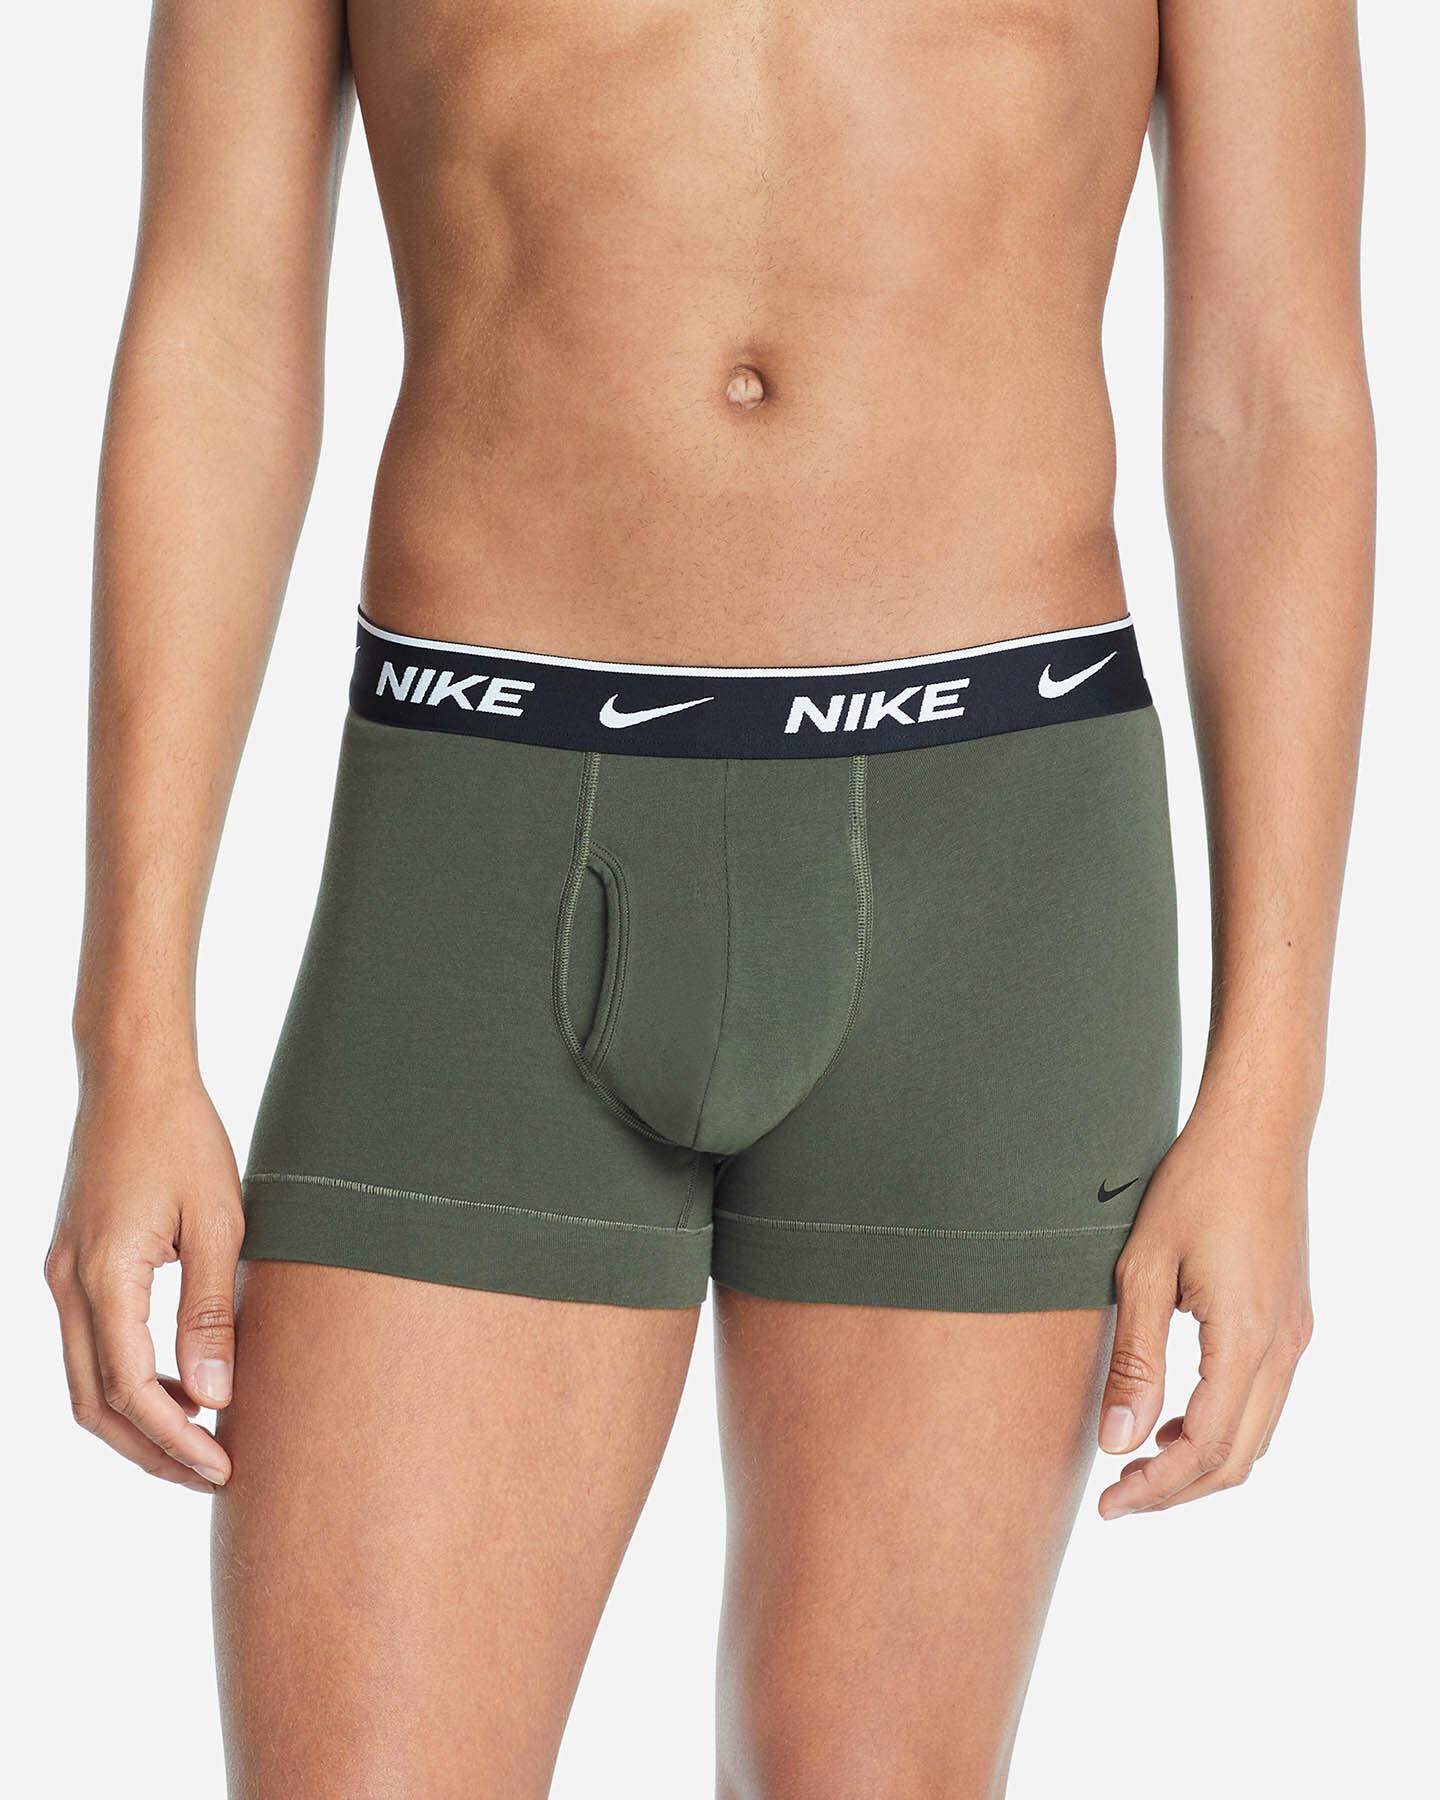  Intimo NIKE 2PACK BOXER EVERYDAY M S4099898|KUY|S scatto 1